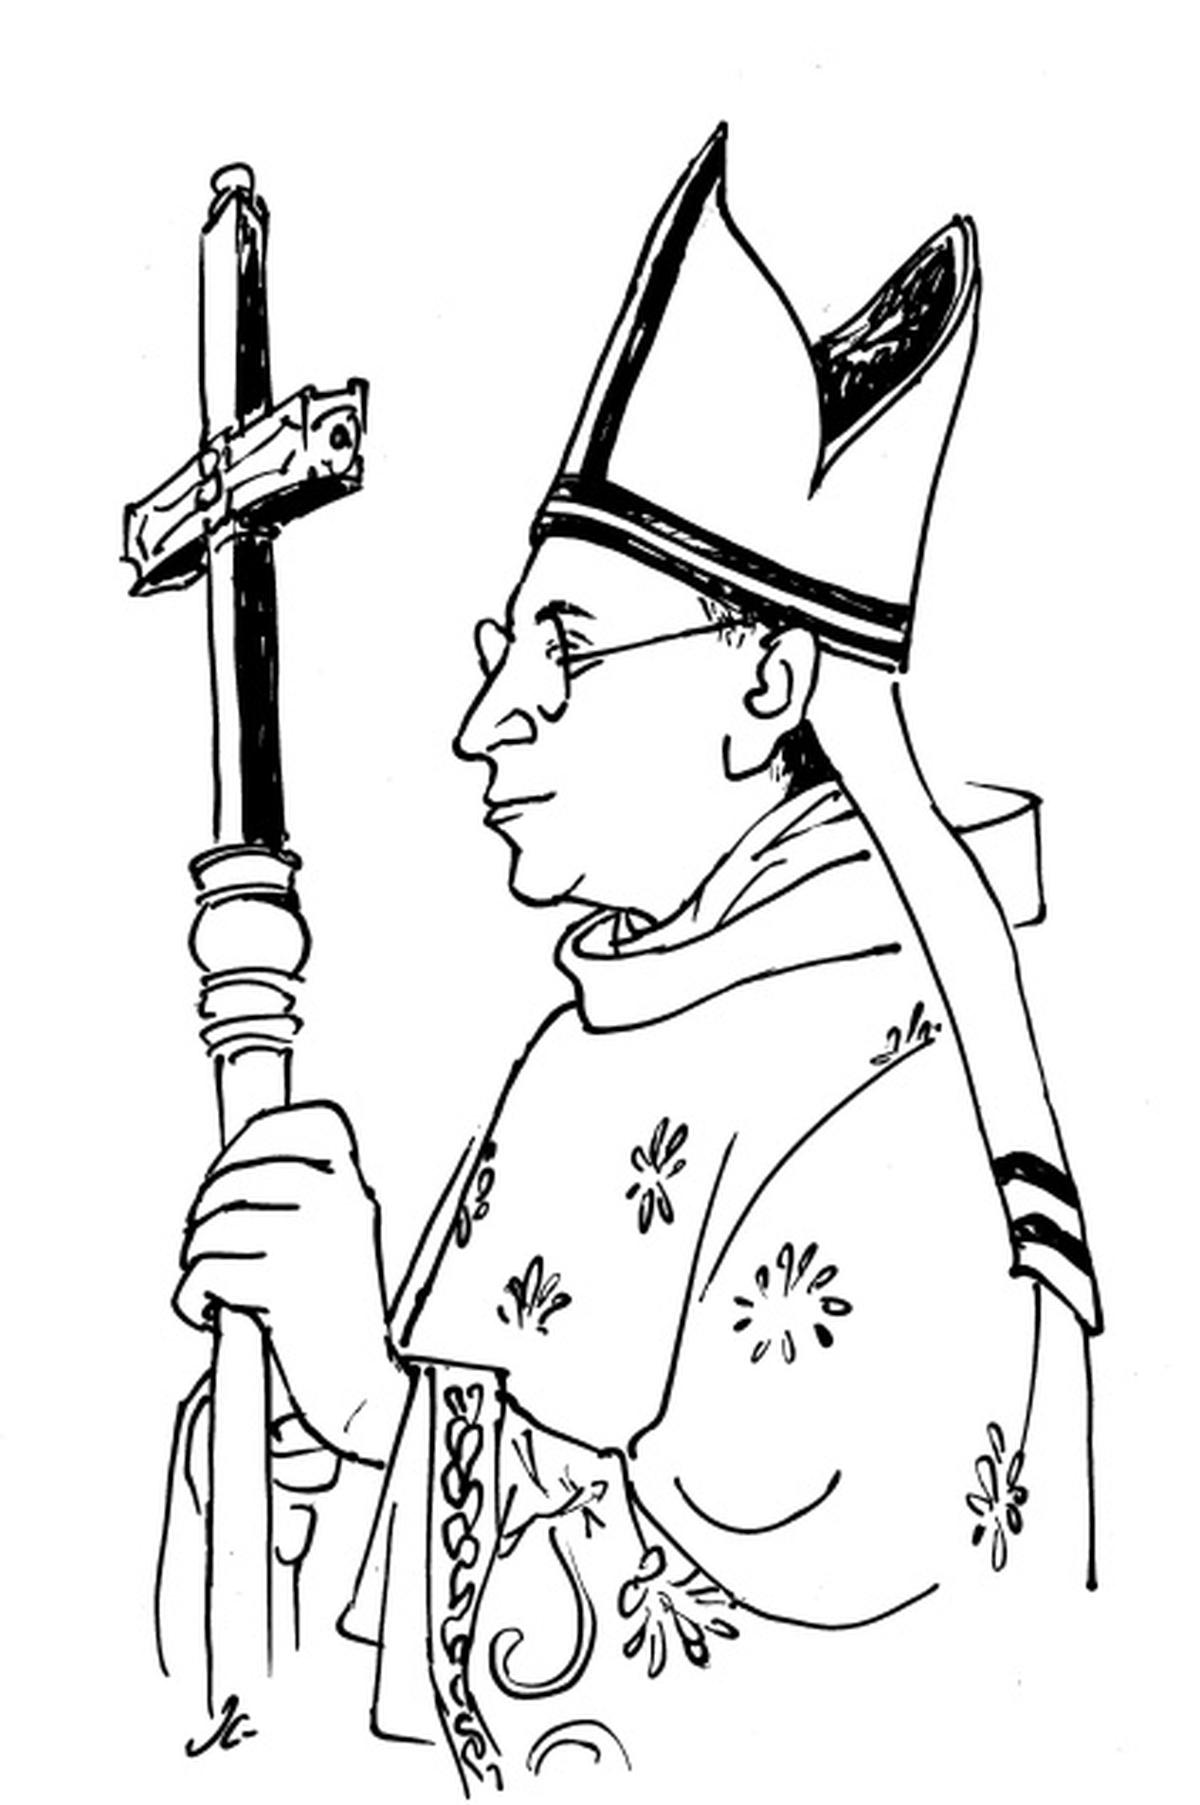 medieval pope drawing